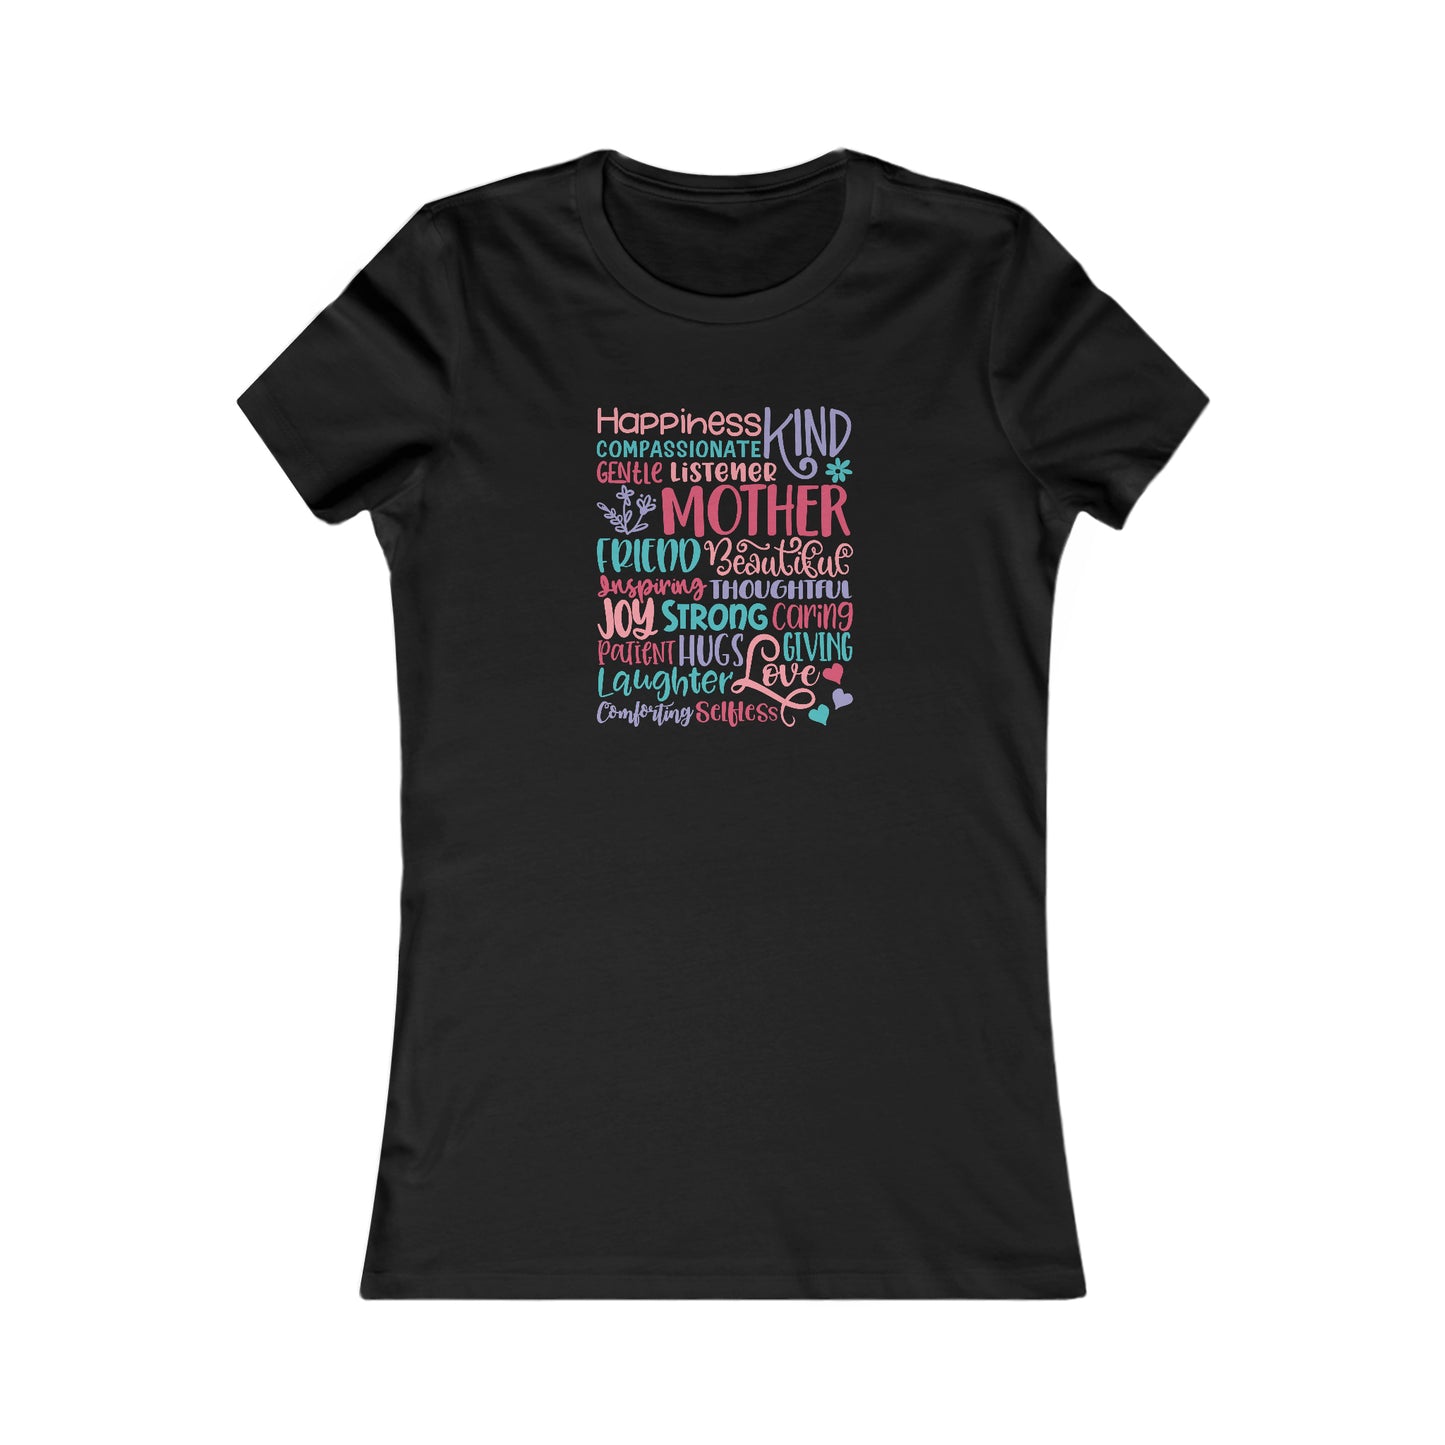 Mom Qualities Subway in Color - Best Mom - Celebrate Mom - Strong Woman - Mom Humor - Women's Favorite Tee